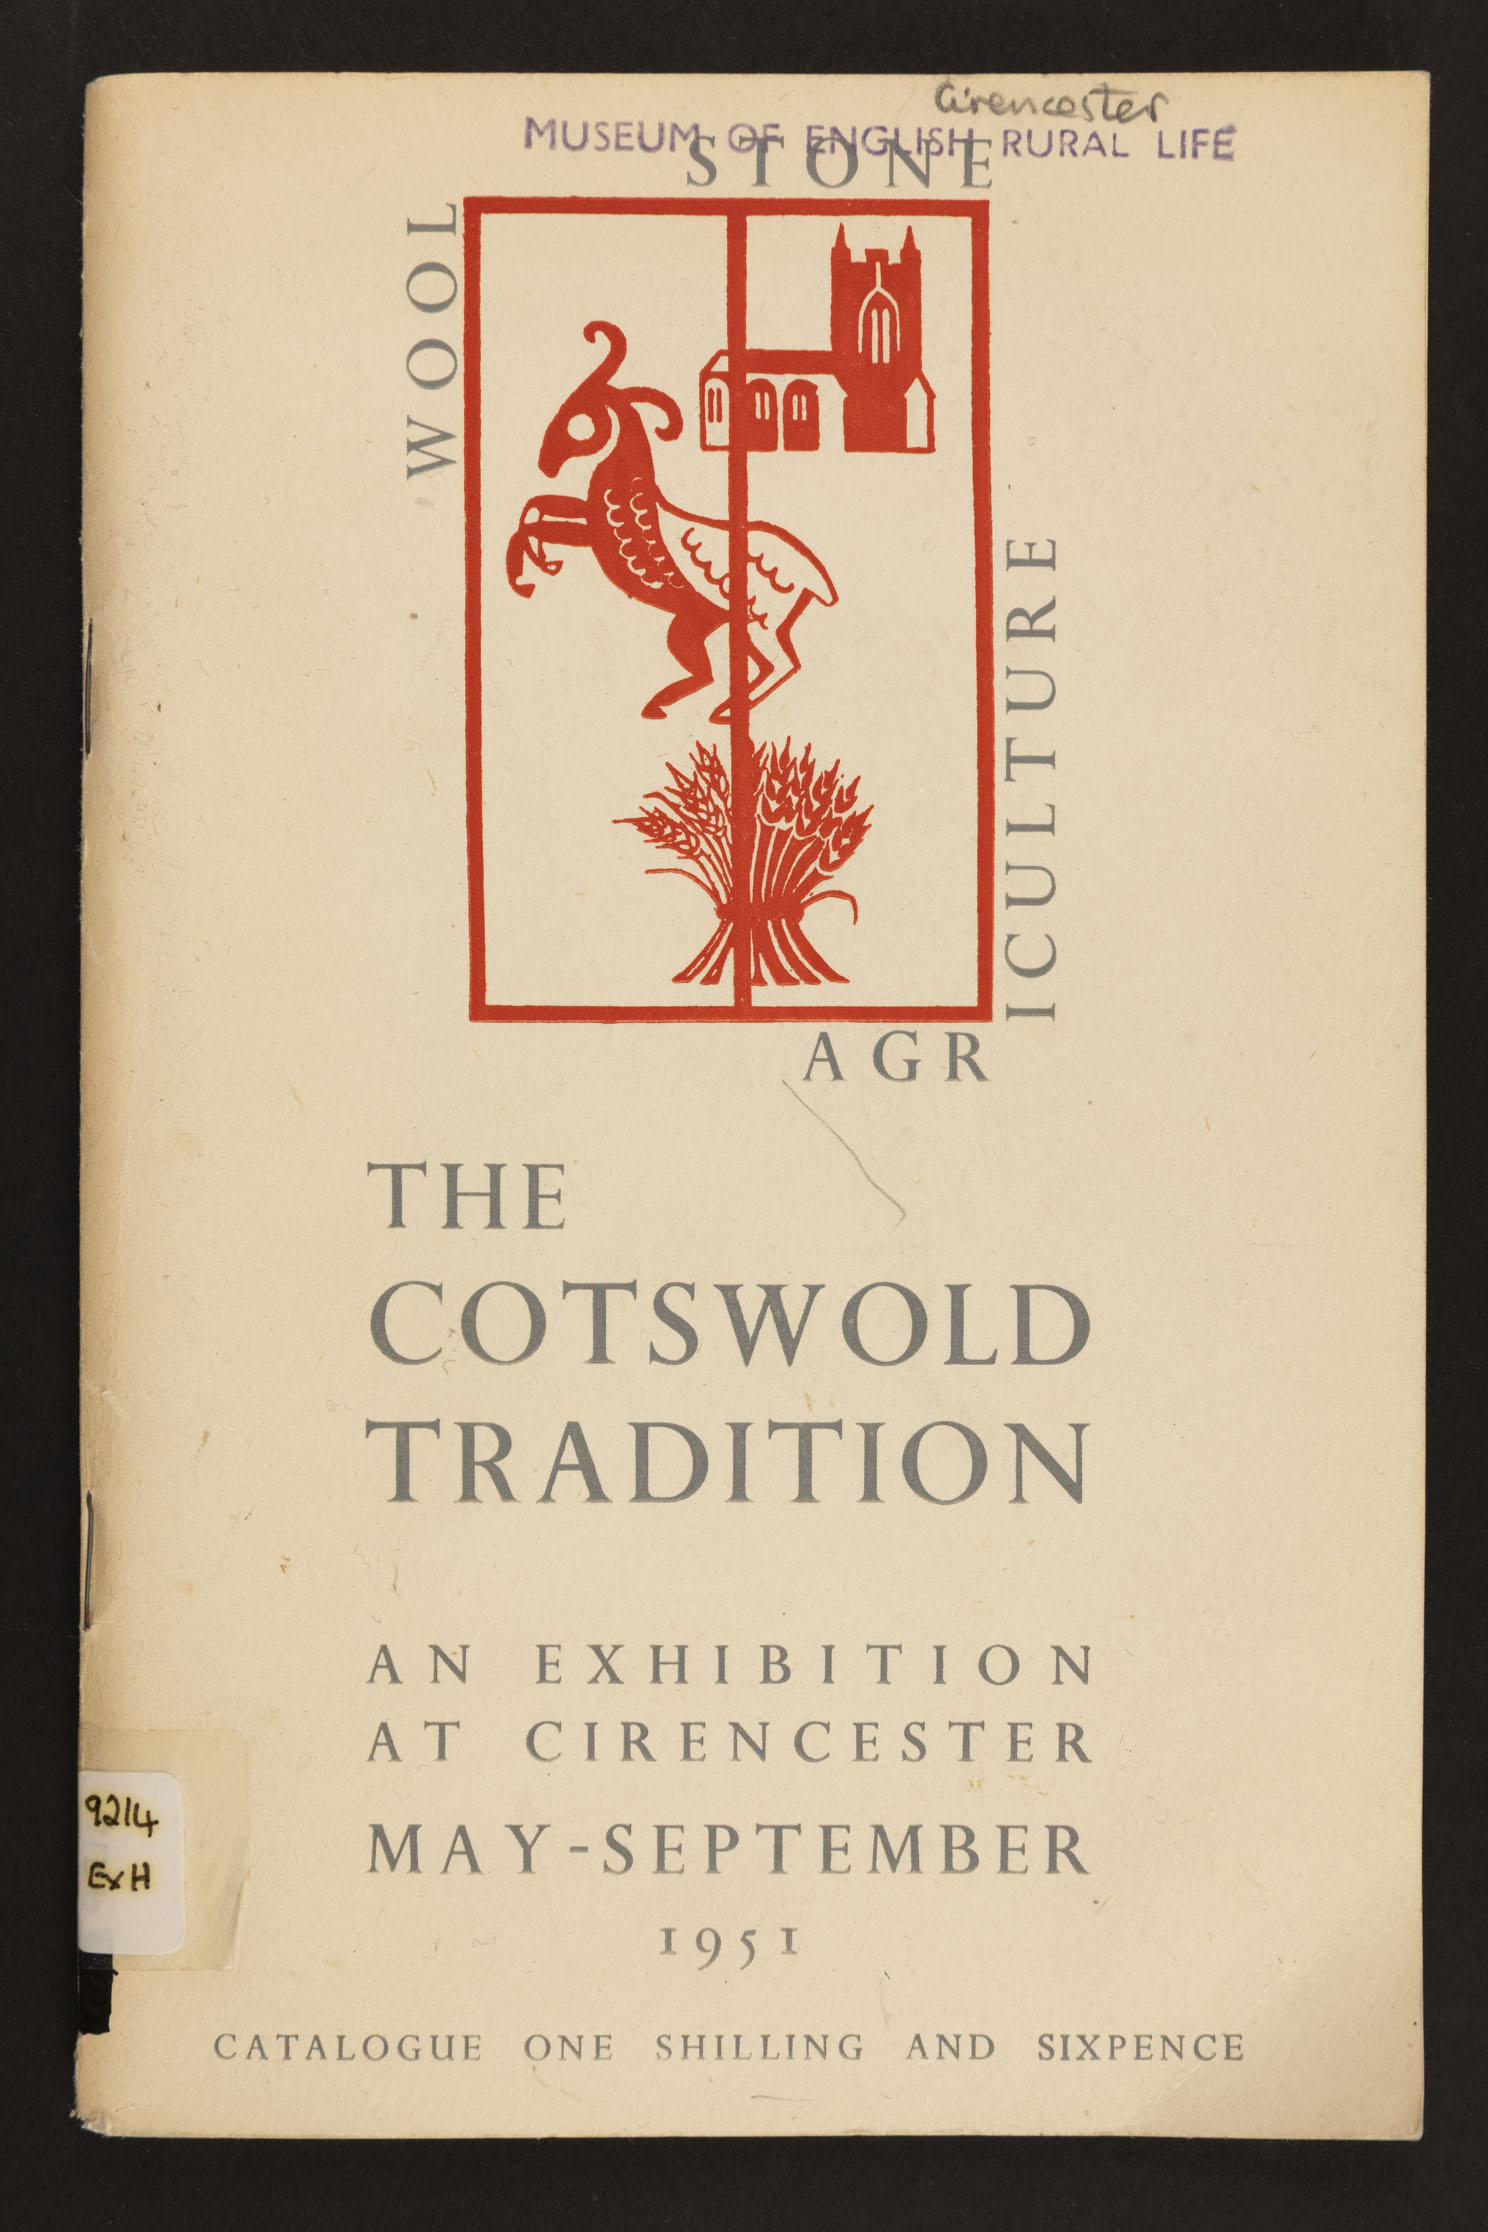 30. Cotswold Tradition